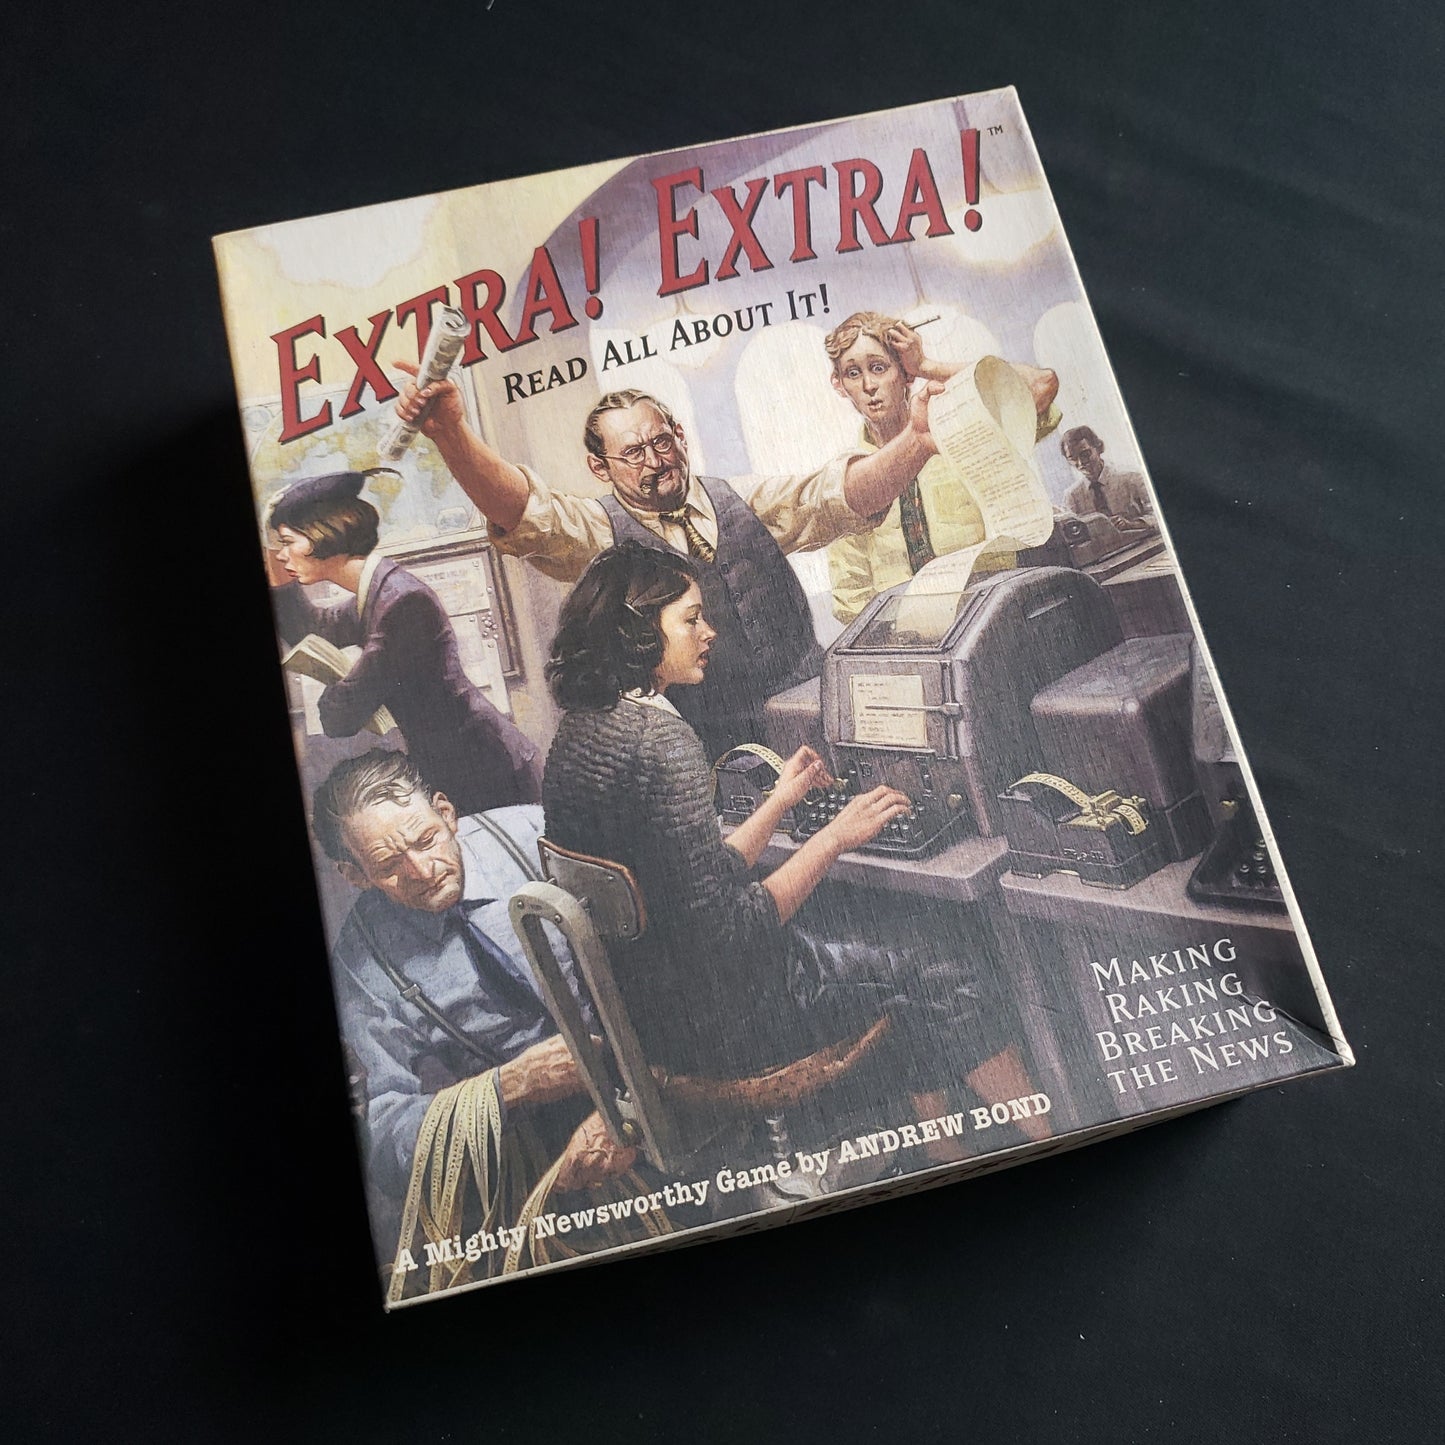 Image shows the front cover of the box of the Extra! Extra! board game